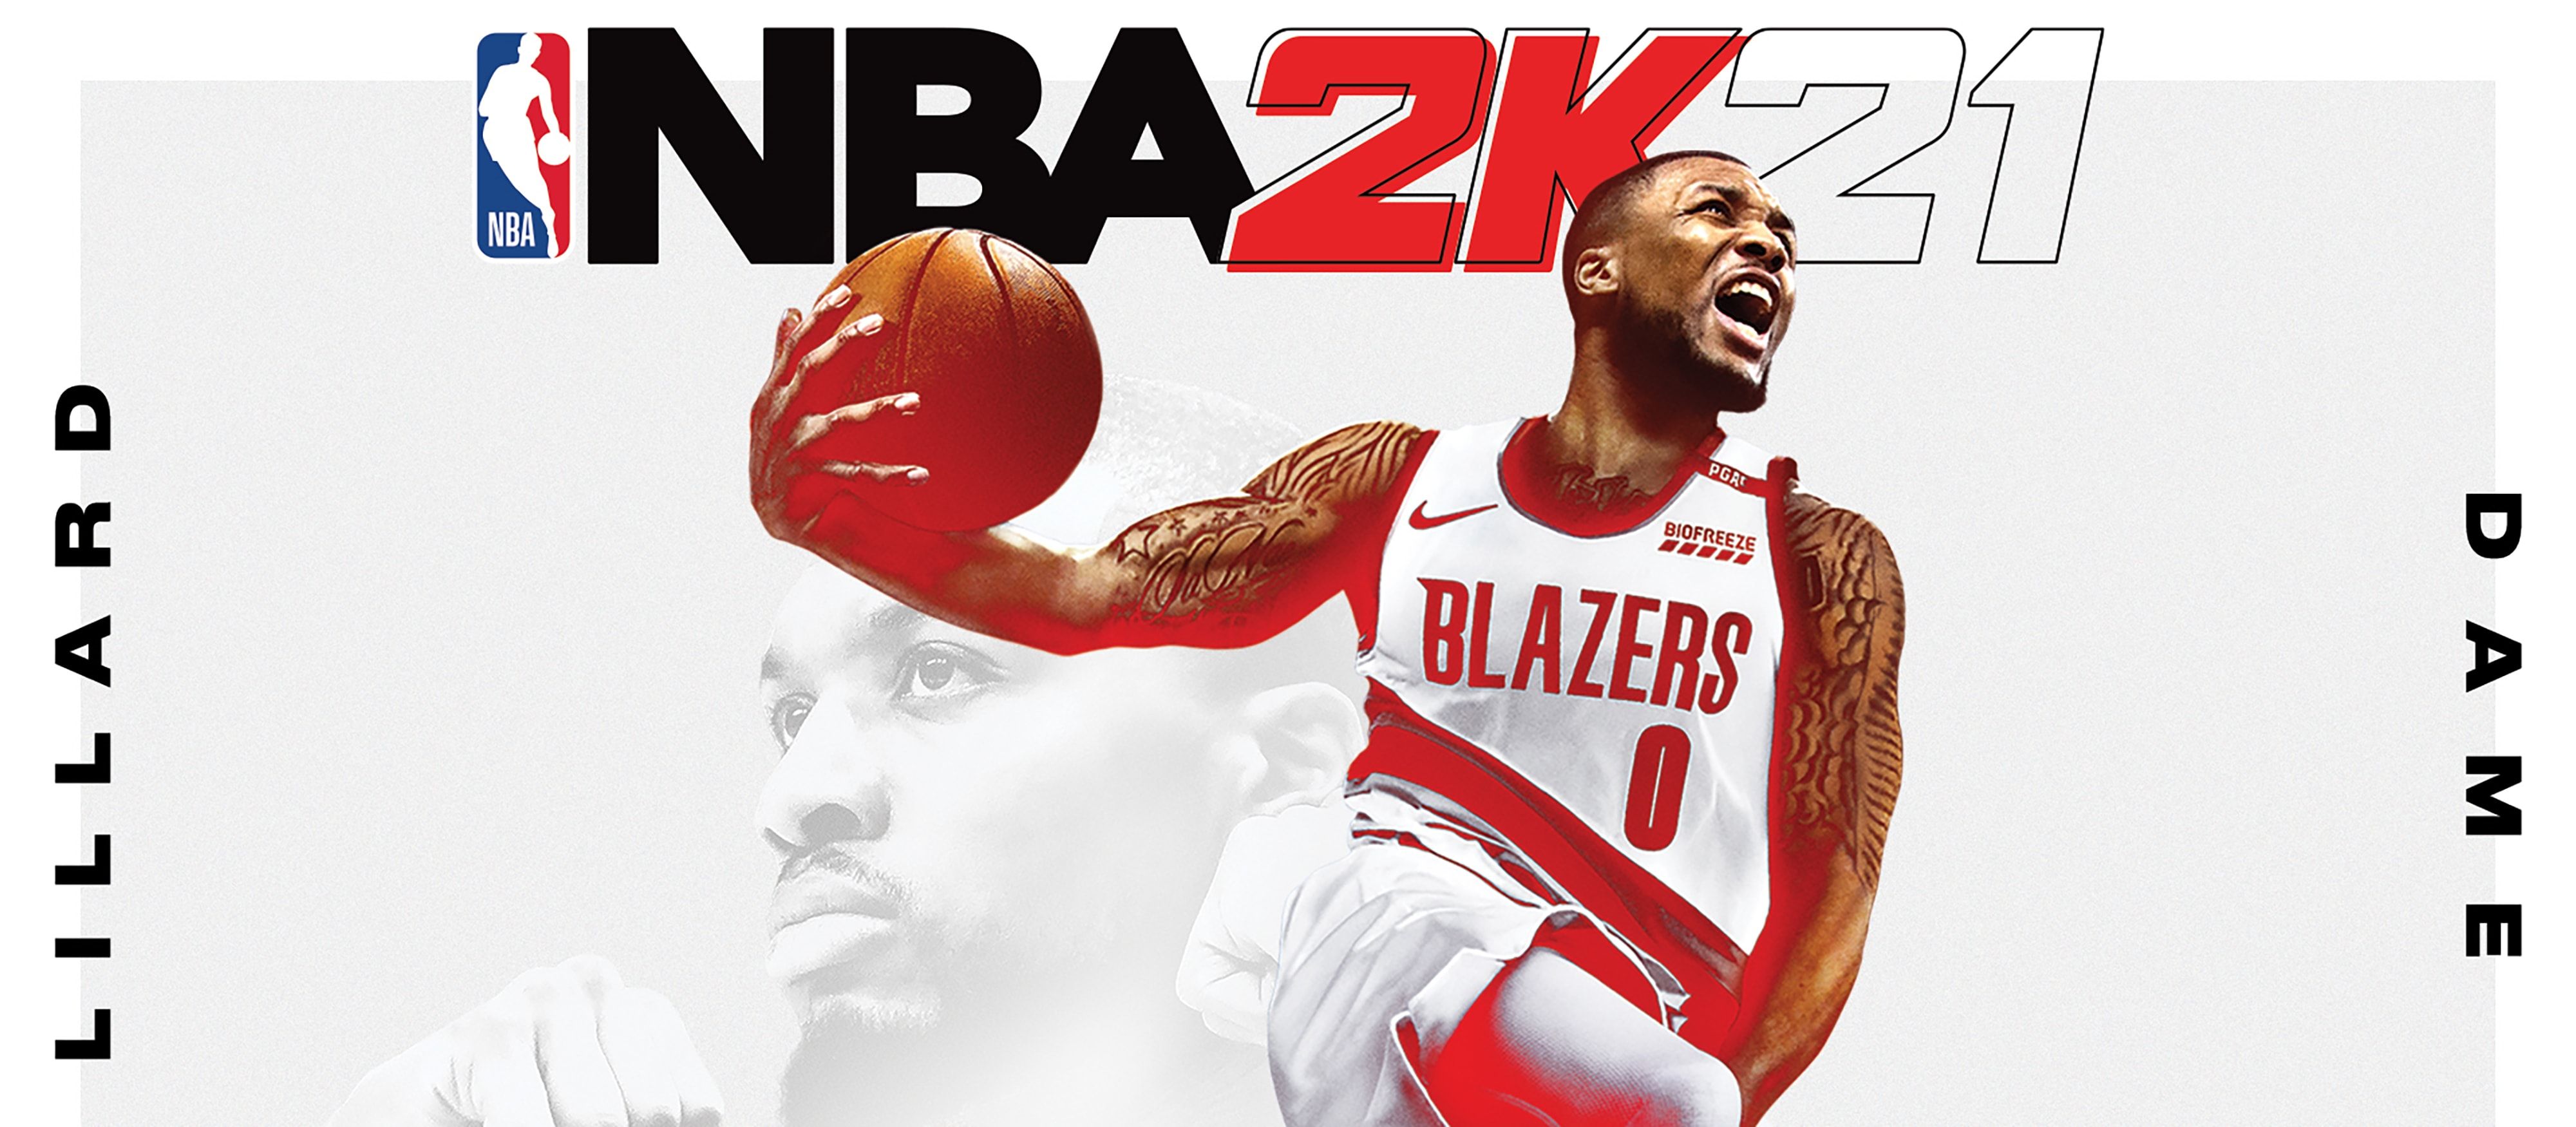 VIDEO: 'Everything Is Dame' With Lillard On The NBA 2K21 Cover. Portland Trail Blazers